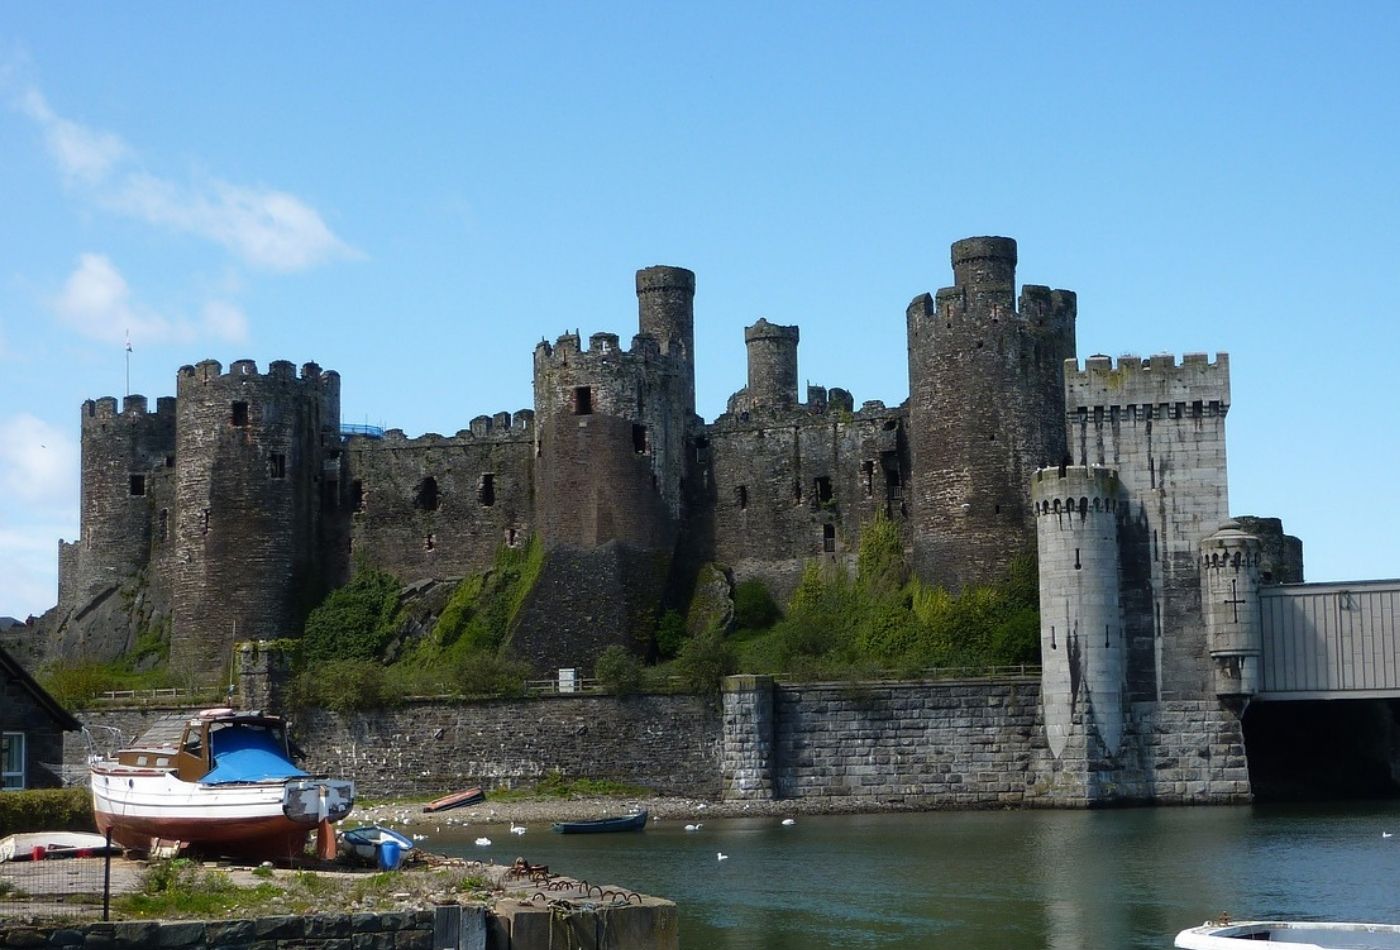 Views of Conwy Castle over the Harbour